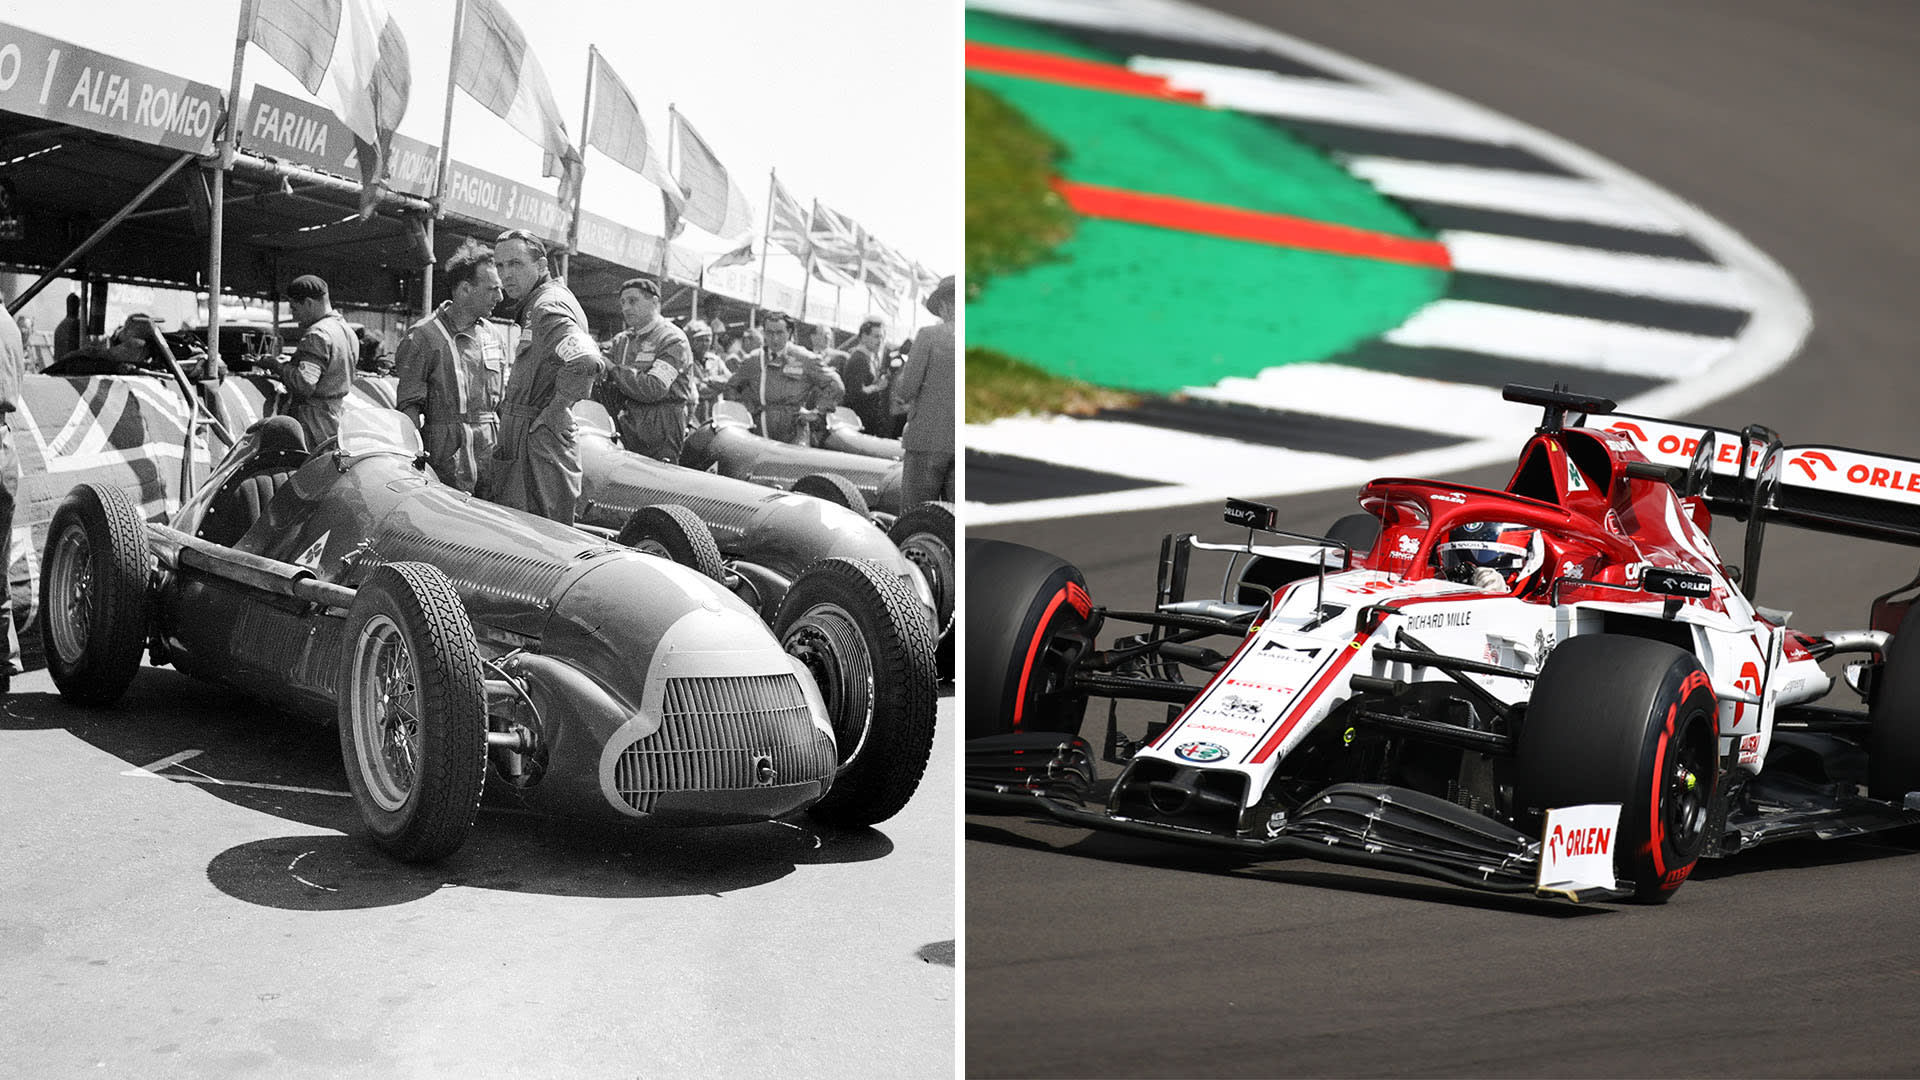 1950 vs 2020 Cars, drivers, safety and pit stops